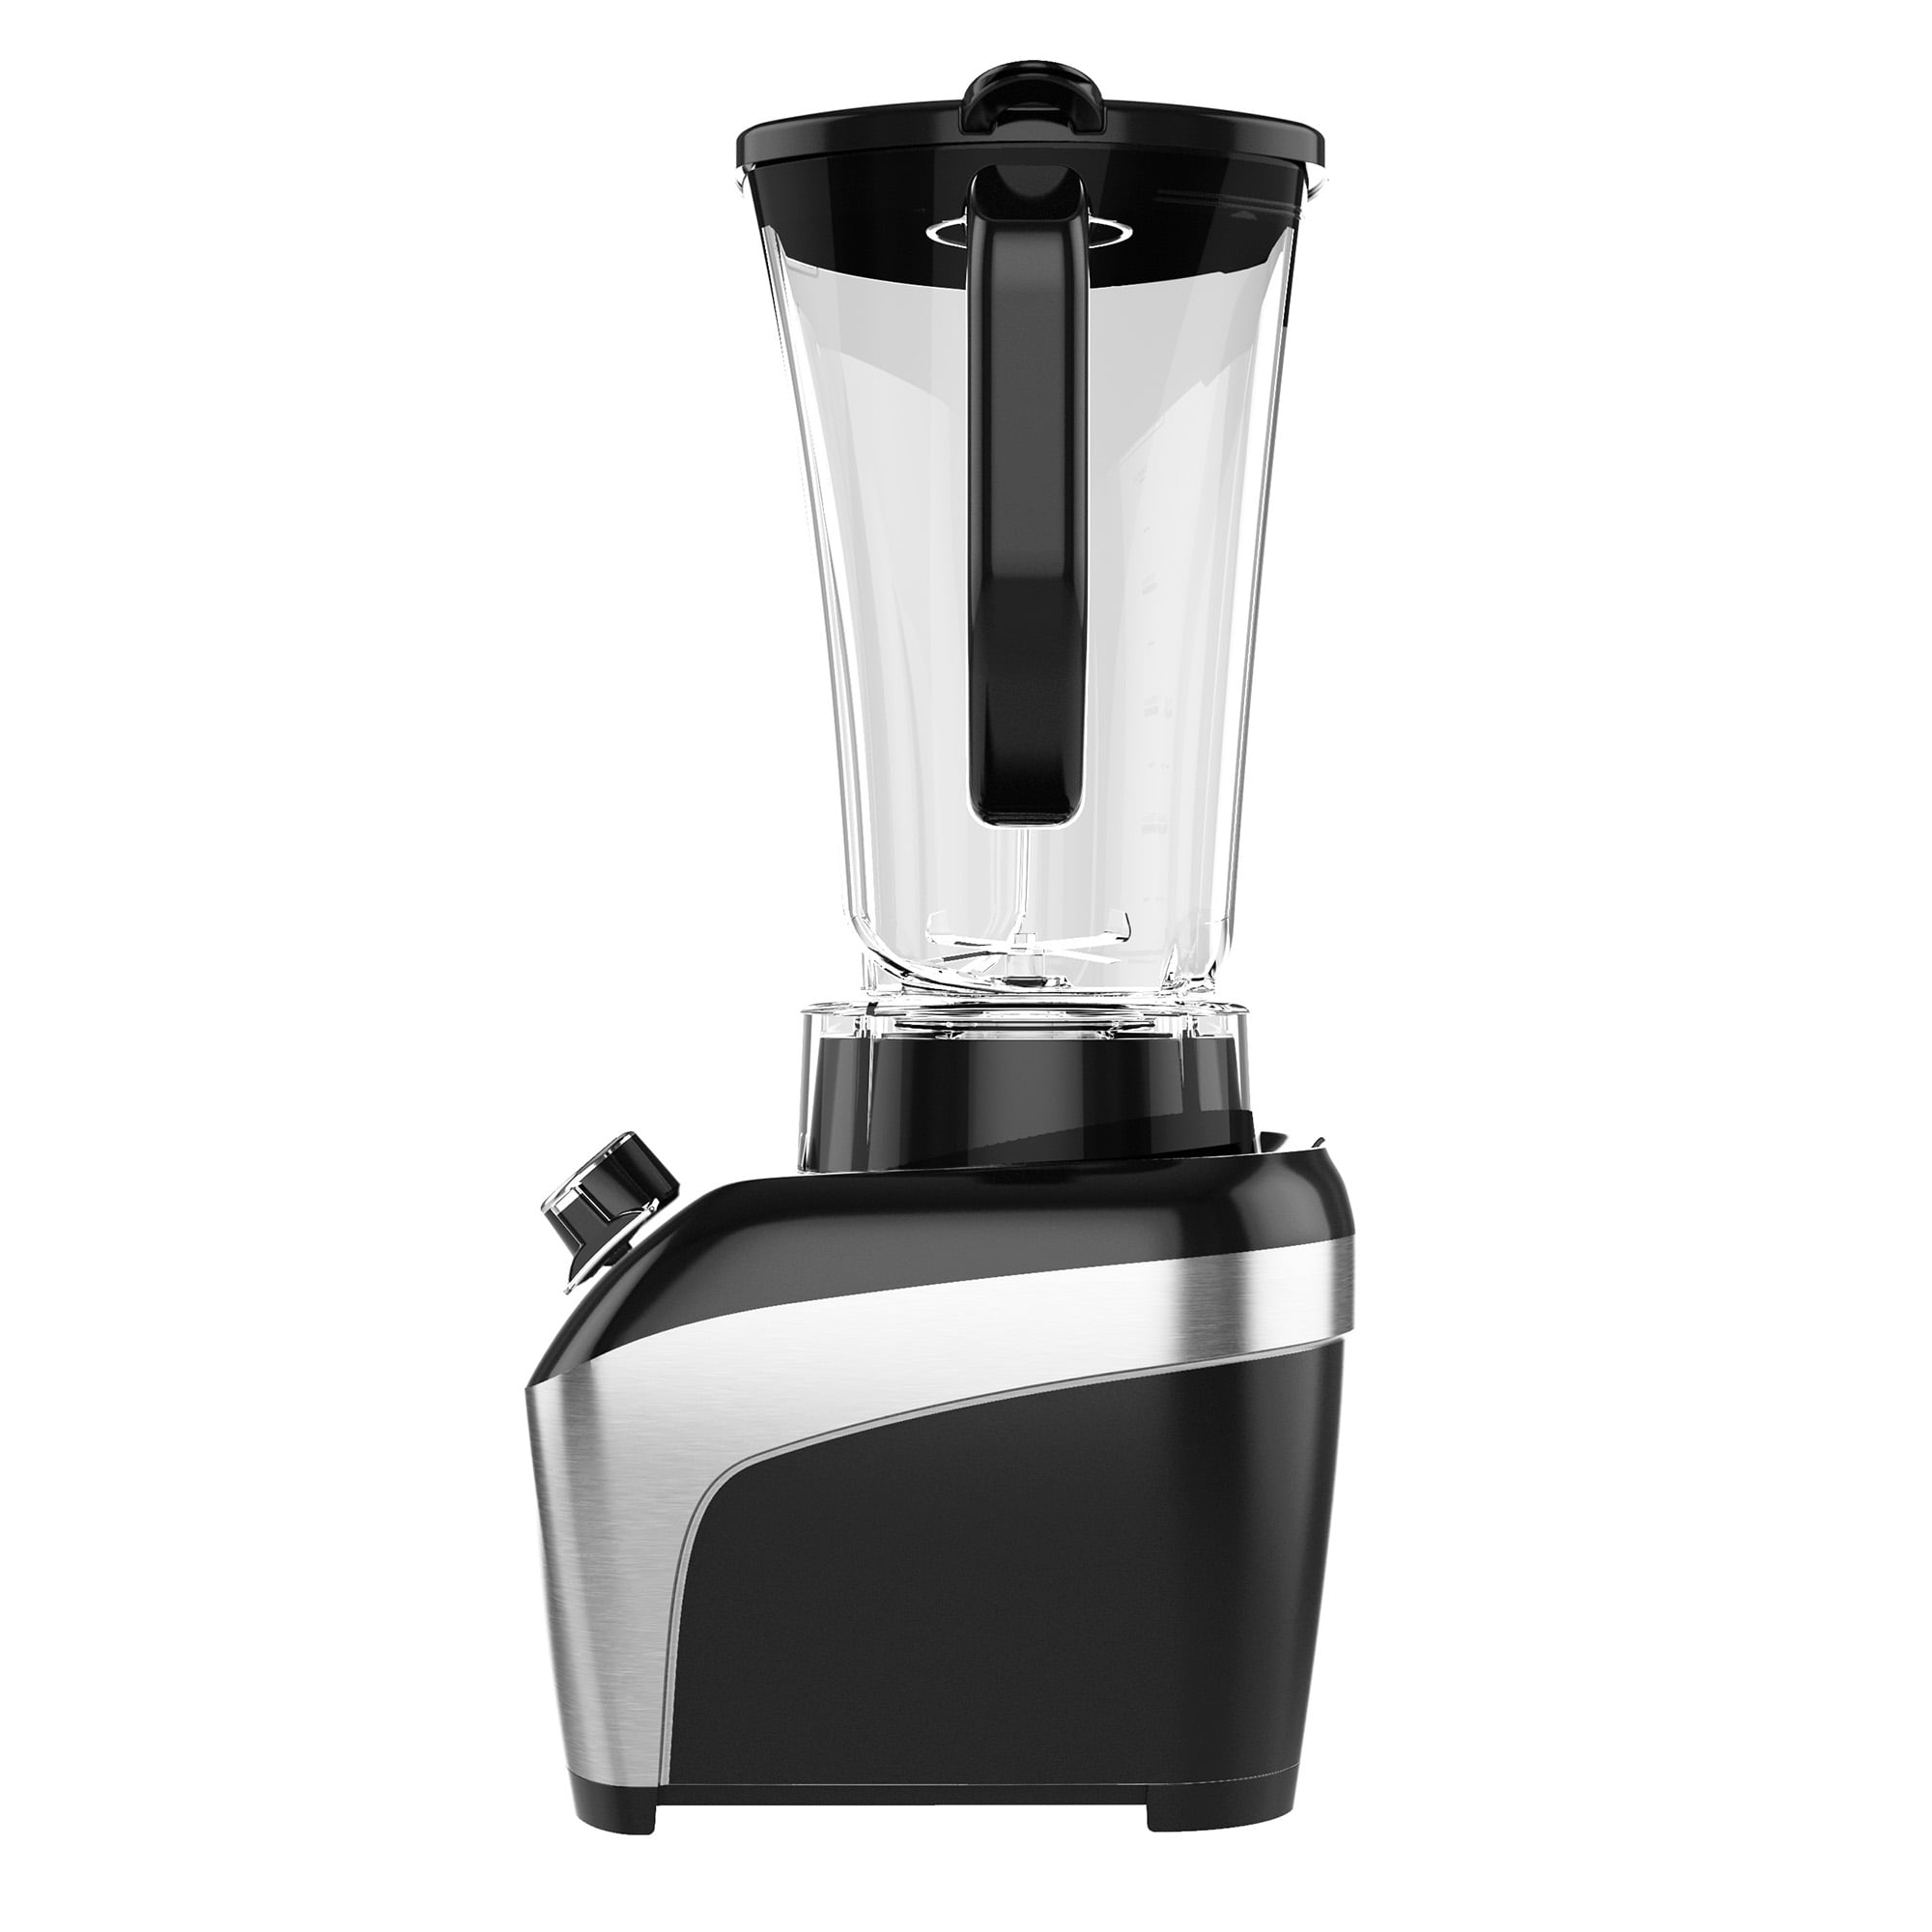  BLACK+DECKER FusionBlade Blender with 6-Cup Glass Jar, 12-Speed  Settings, Silver, BL1111SG: Home & Kitchen